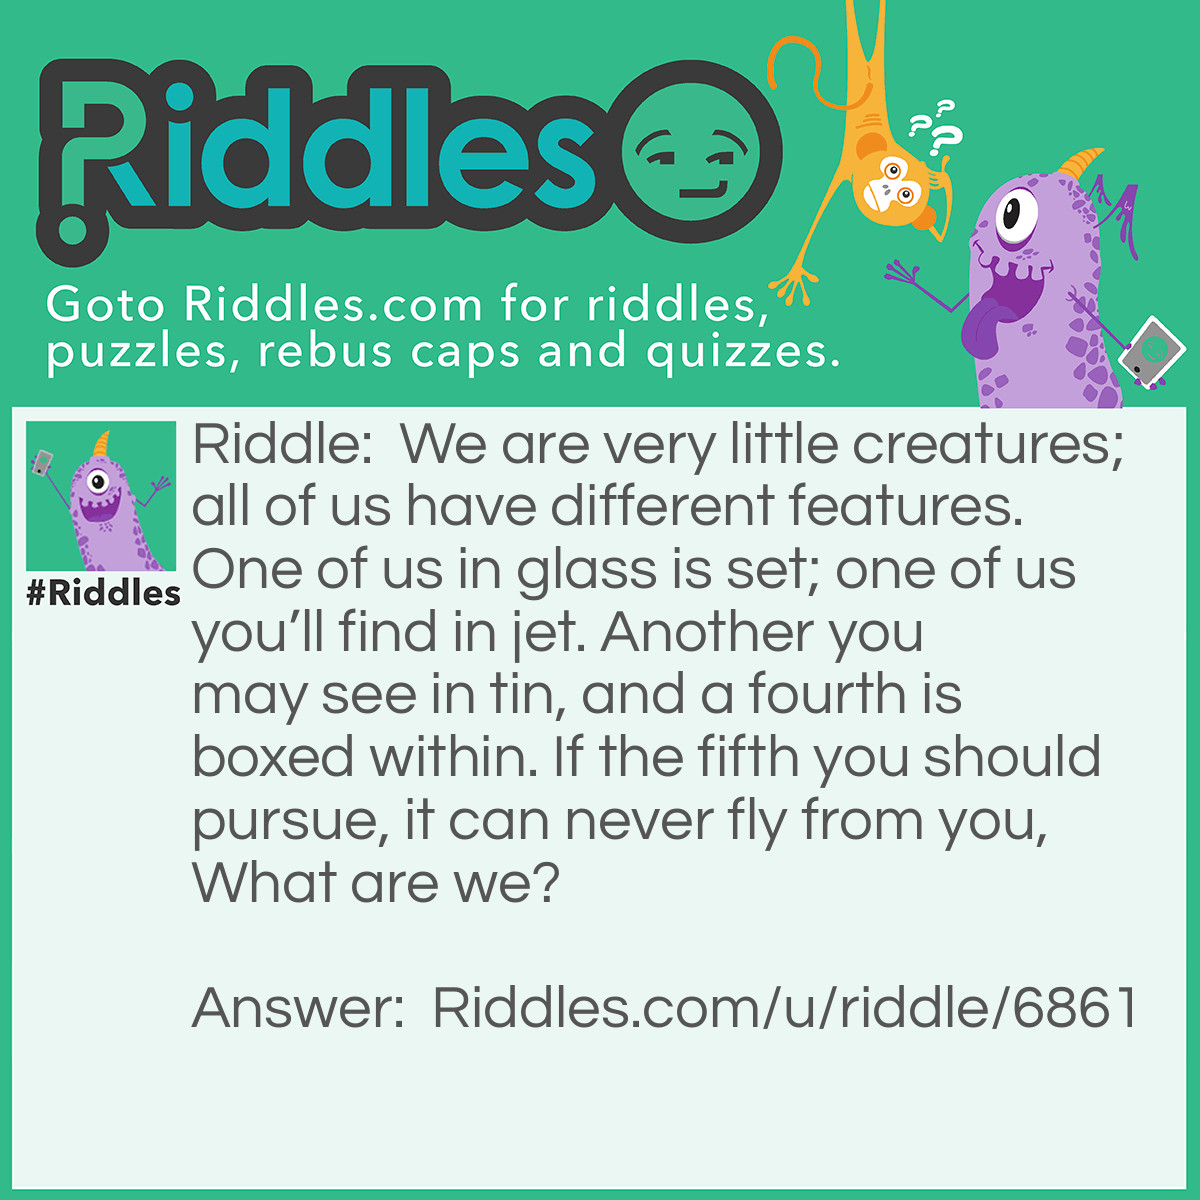 Riddle: We are very little creatures; all of us have different features. One of us in glass is set; one of us you'll find in jet. Another you may see in tin, and a fourth is boxed within. If the fifth you should pursue, it can never fly from you, What are we? Answer: The vowels : a,e,i,o, and u.